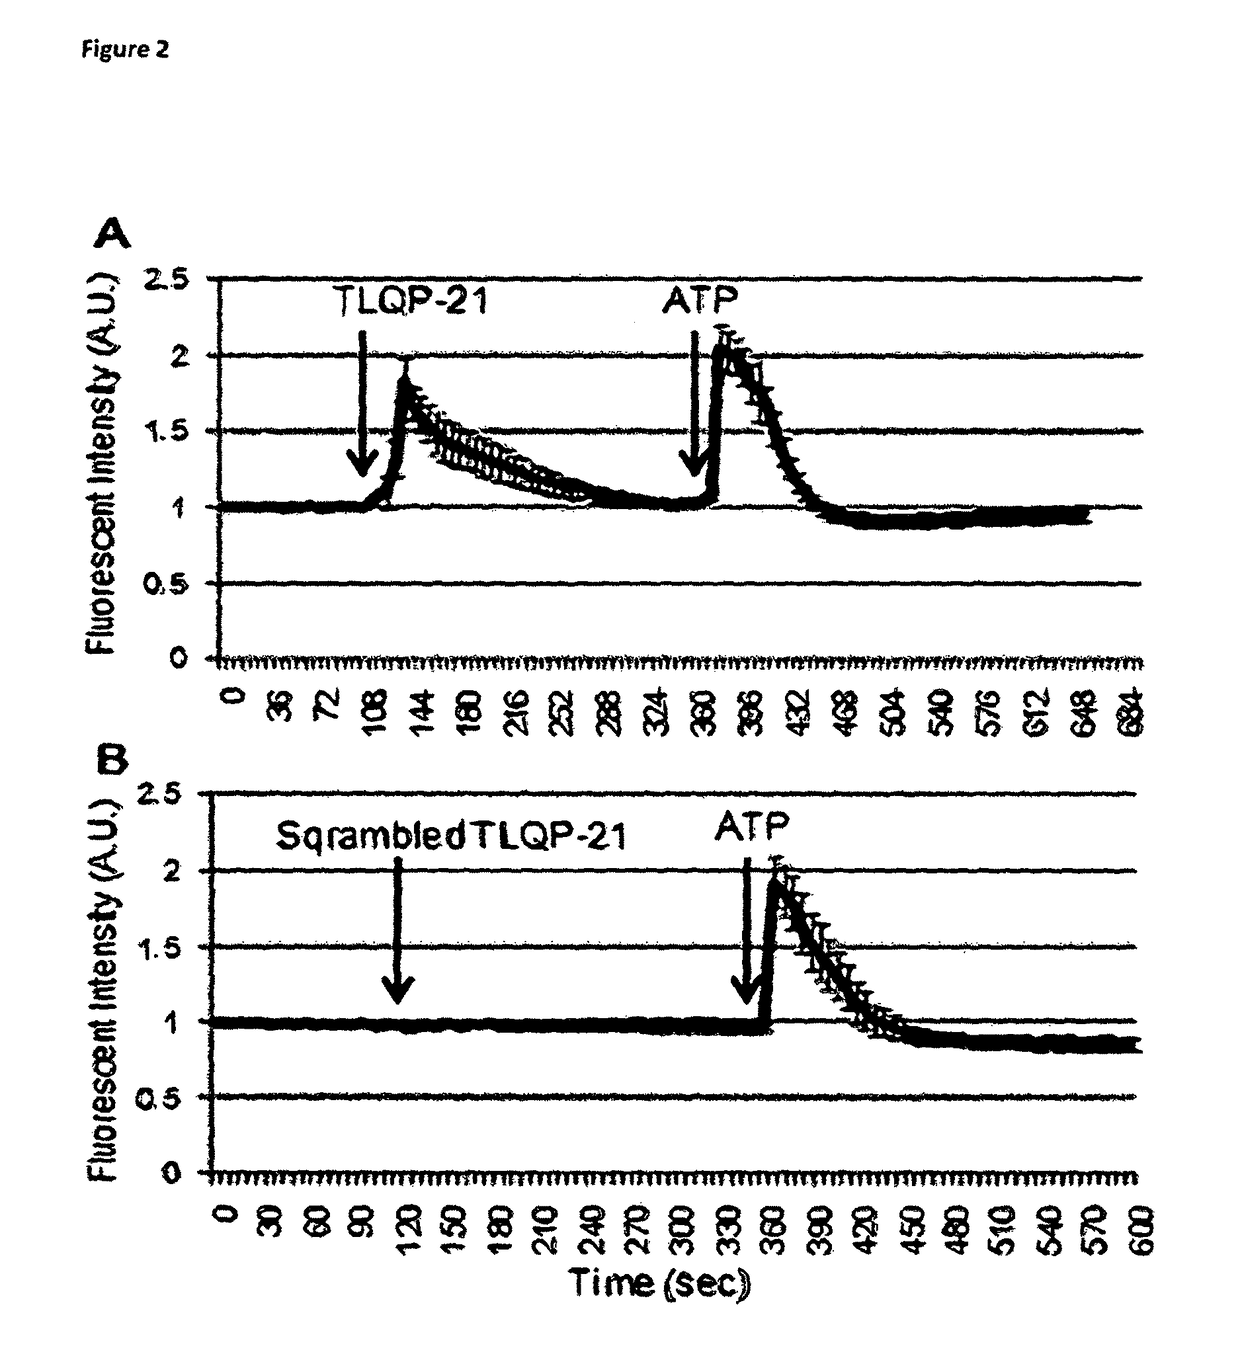 Methods of treating pain by inhibition of VGF activity